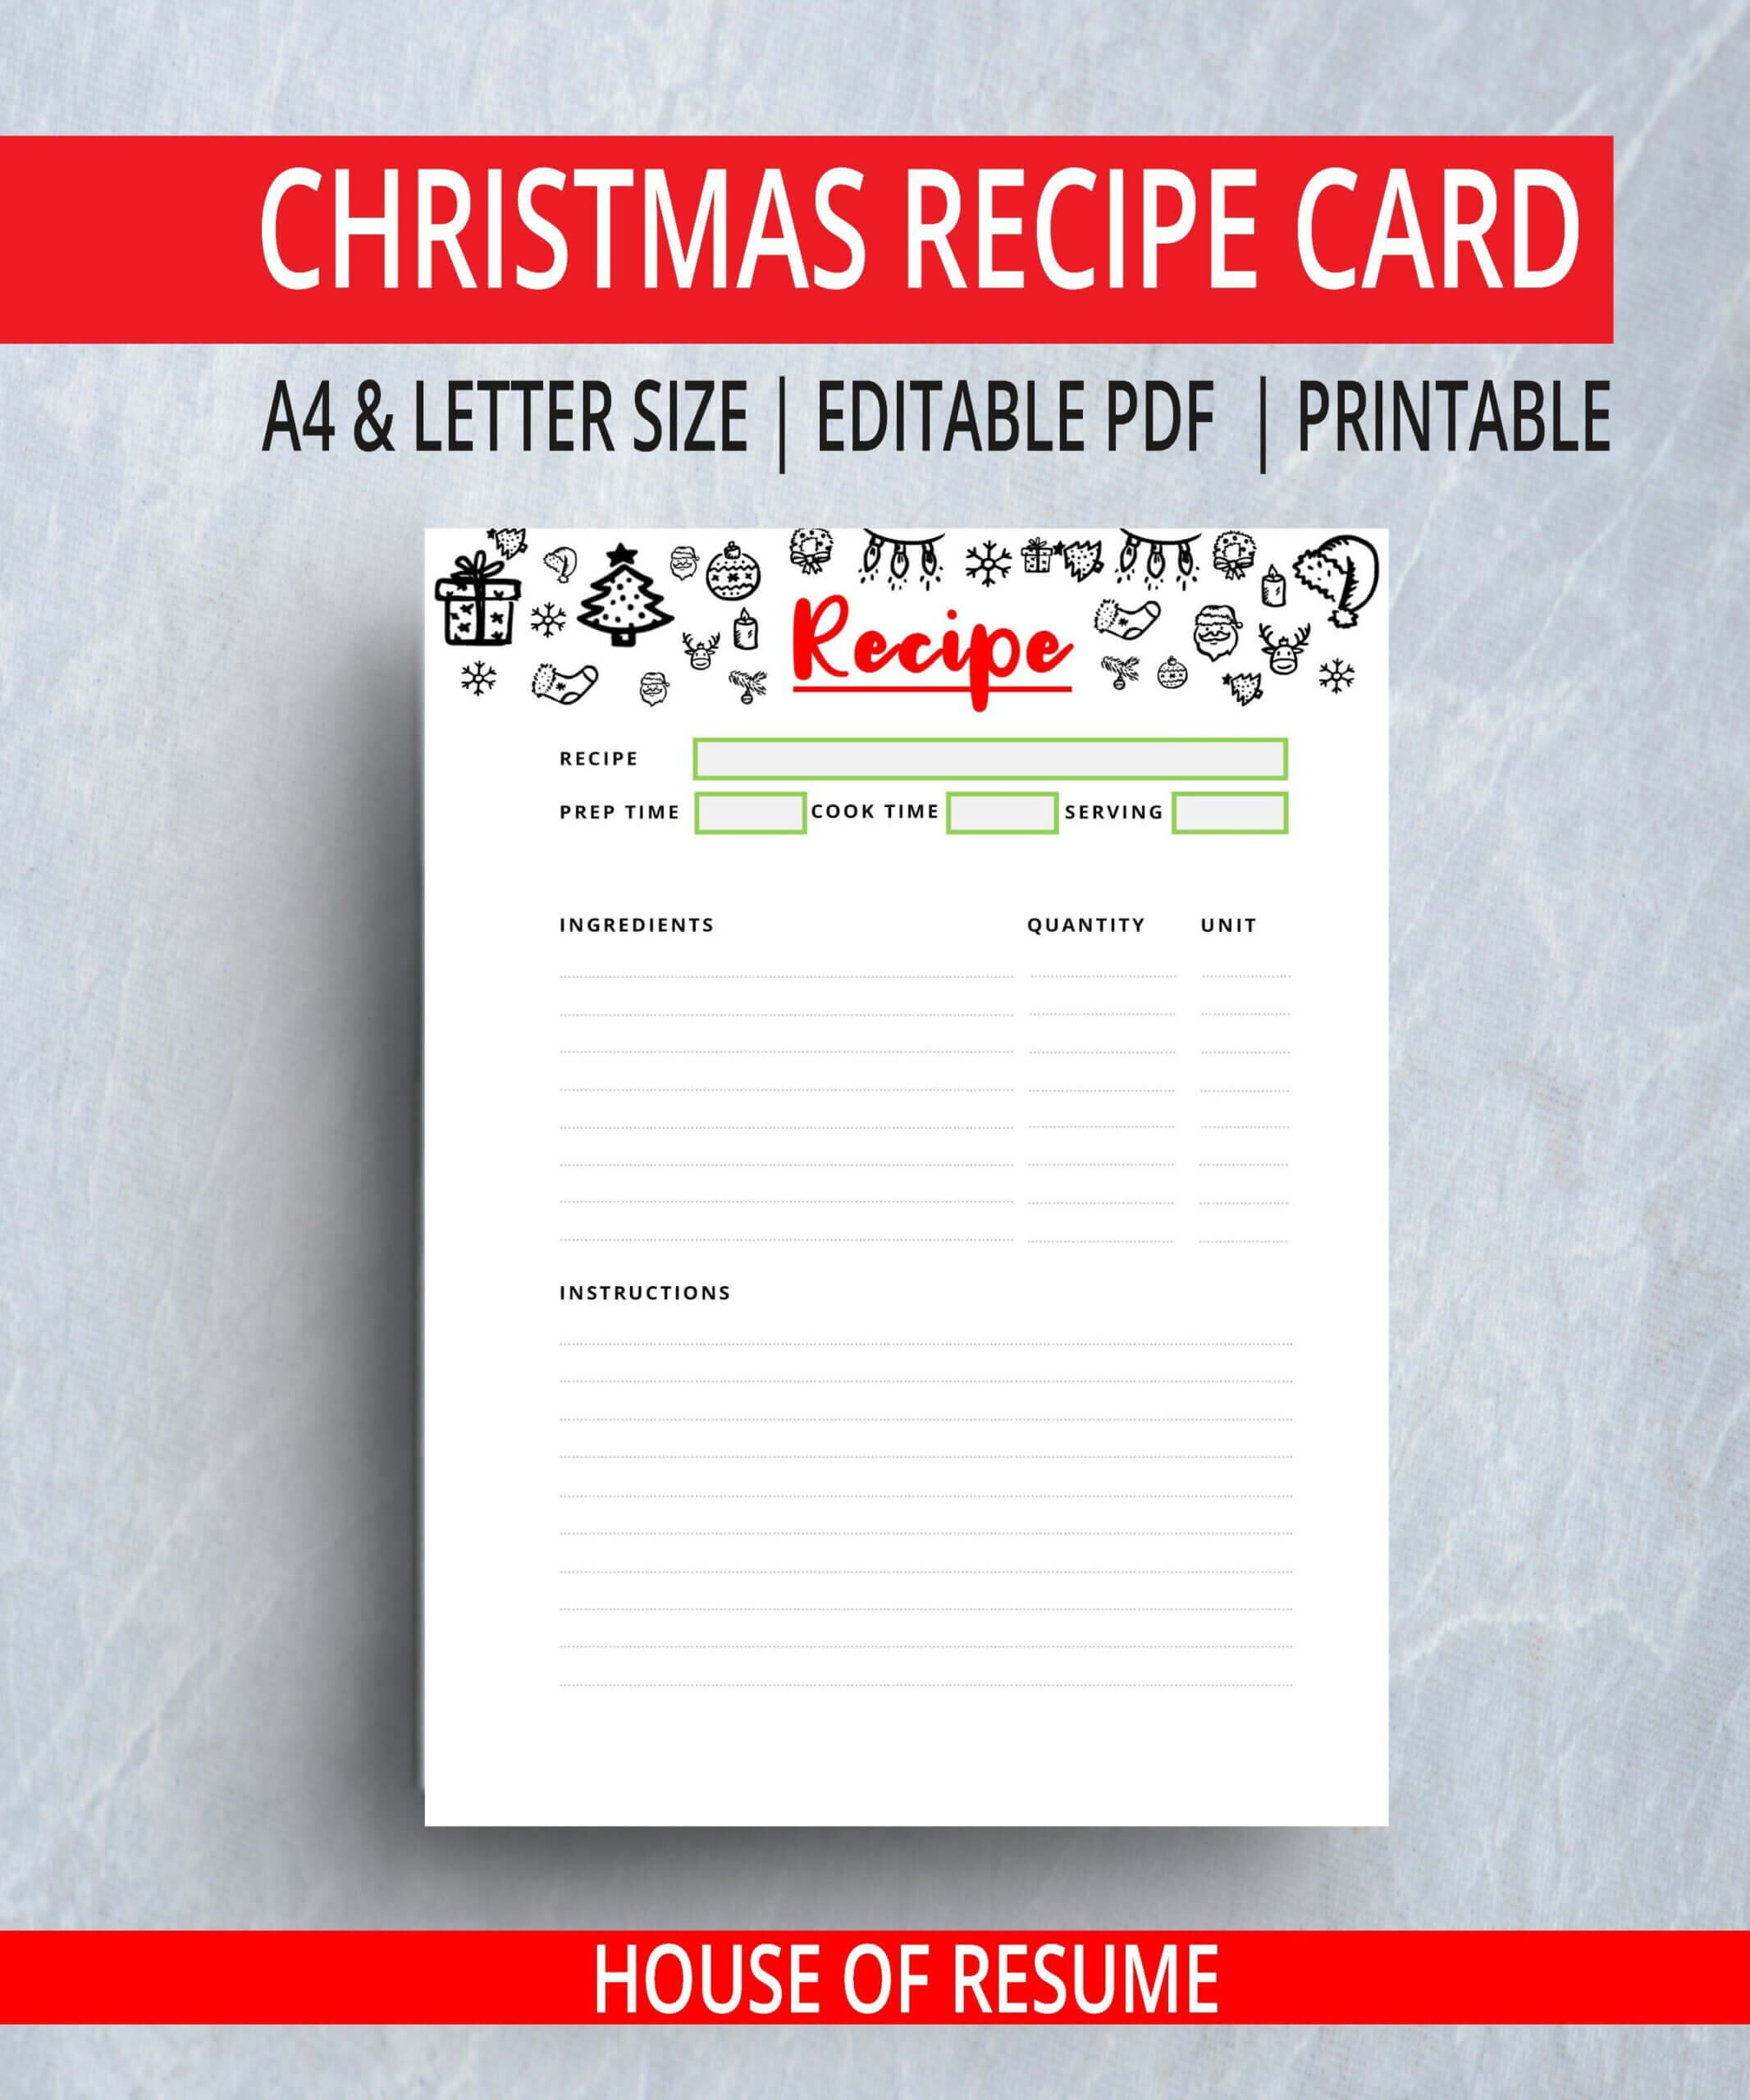 003 Christmas Recipe Card Template Ideas Beautiful Blank Throughout Cookie Exchange Recipe Card Template